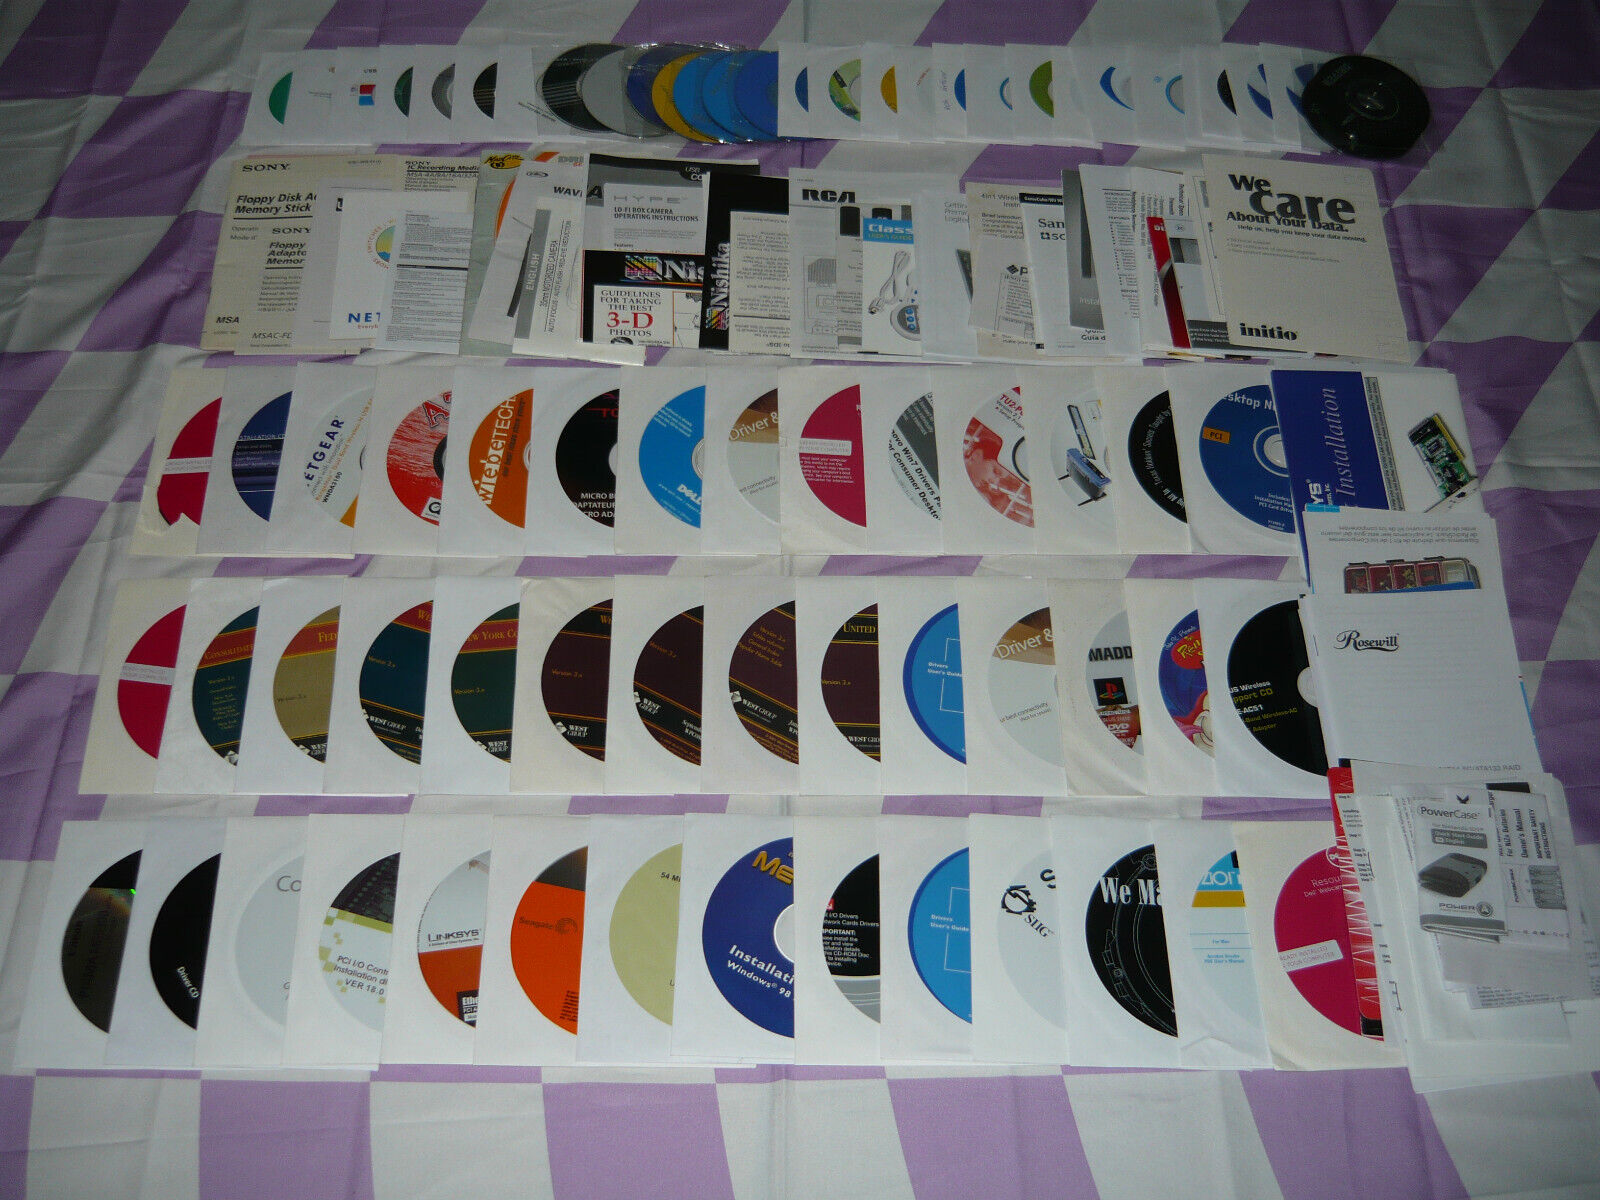 Huge Mixed Lot of Assorted Driver Software CDs and Manuals Used Description